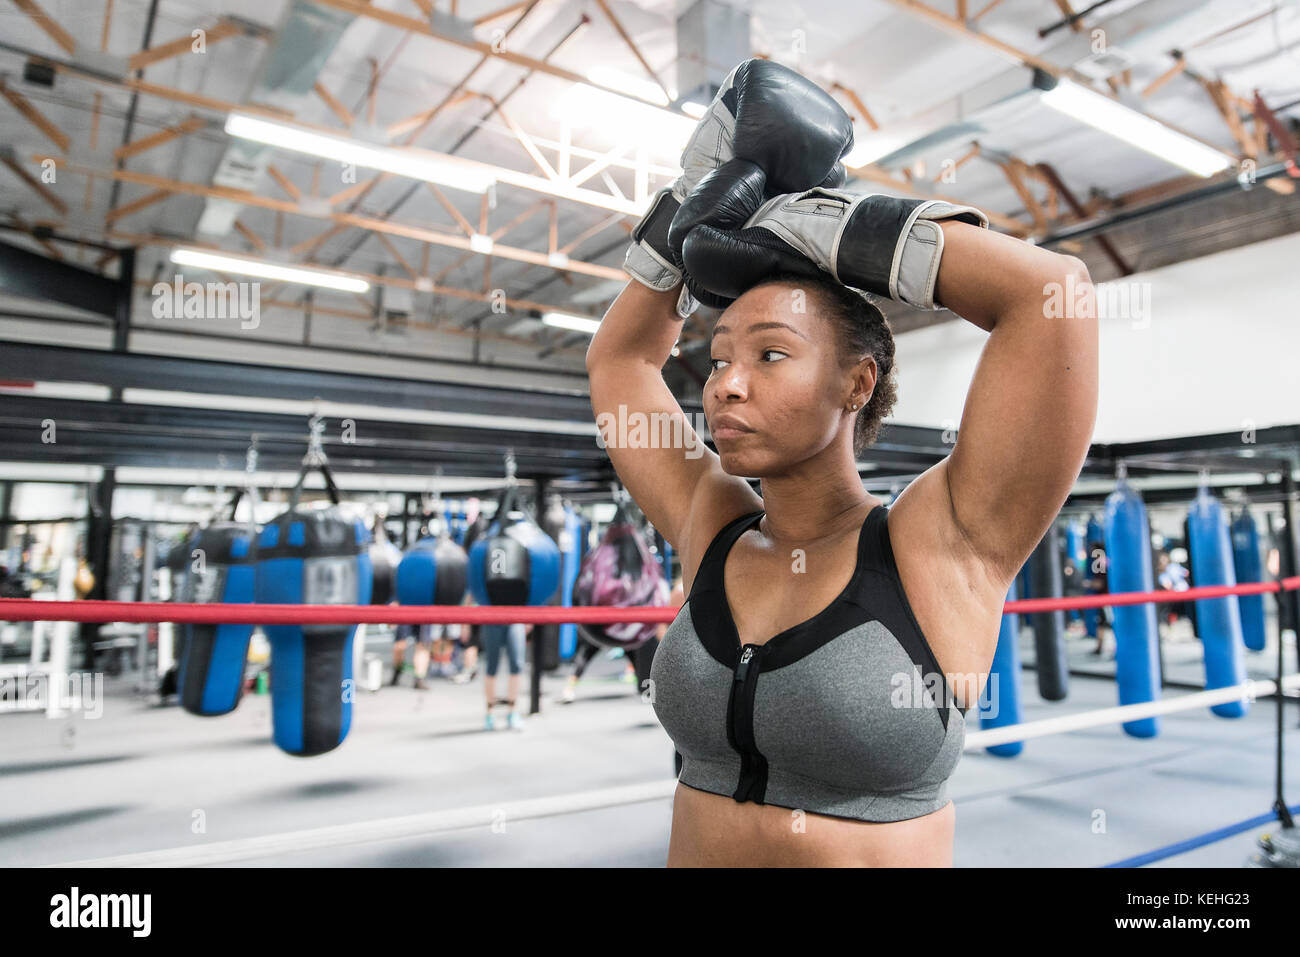 Black woman resting with arms raised in boxing ring Stock Photo